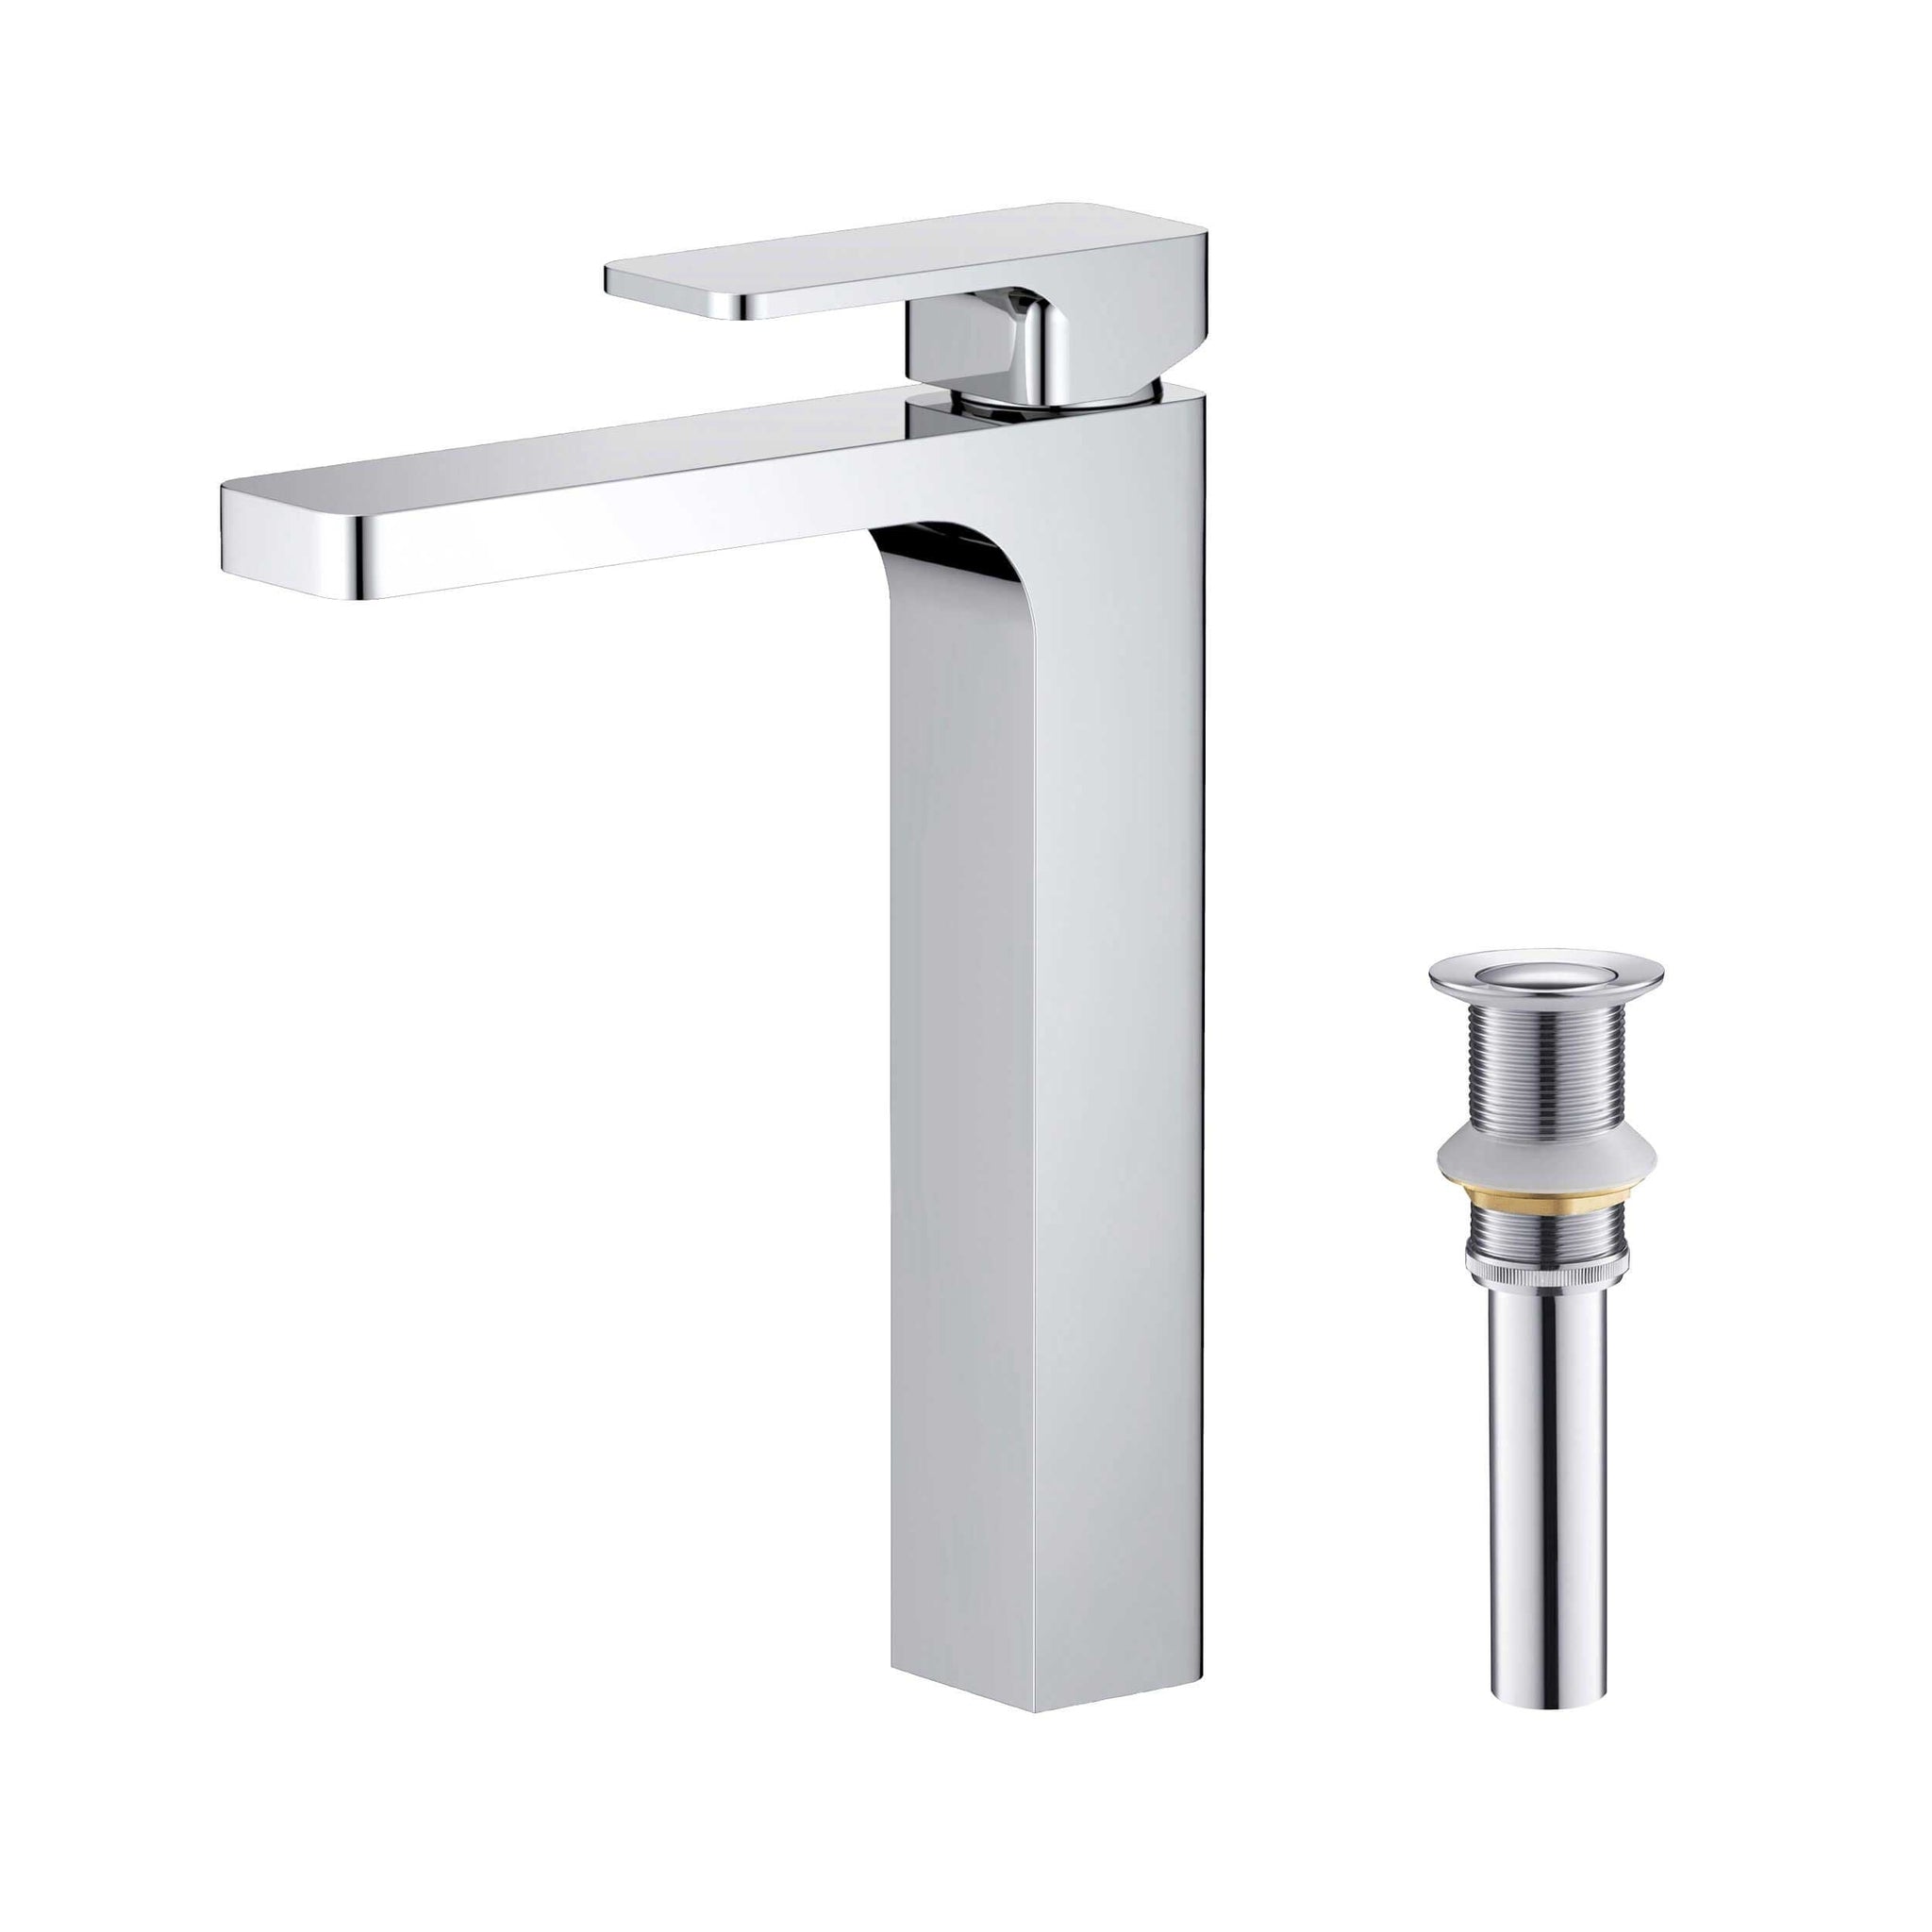 KIBI, KIBI Blaze-T Single Handle Chrome Solid Brass Bathroom Vessel Sink Faucet With Pop-Up Drain Stopper Small Cover Without Overflow